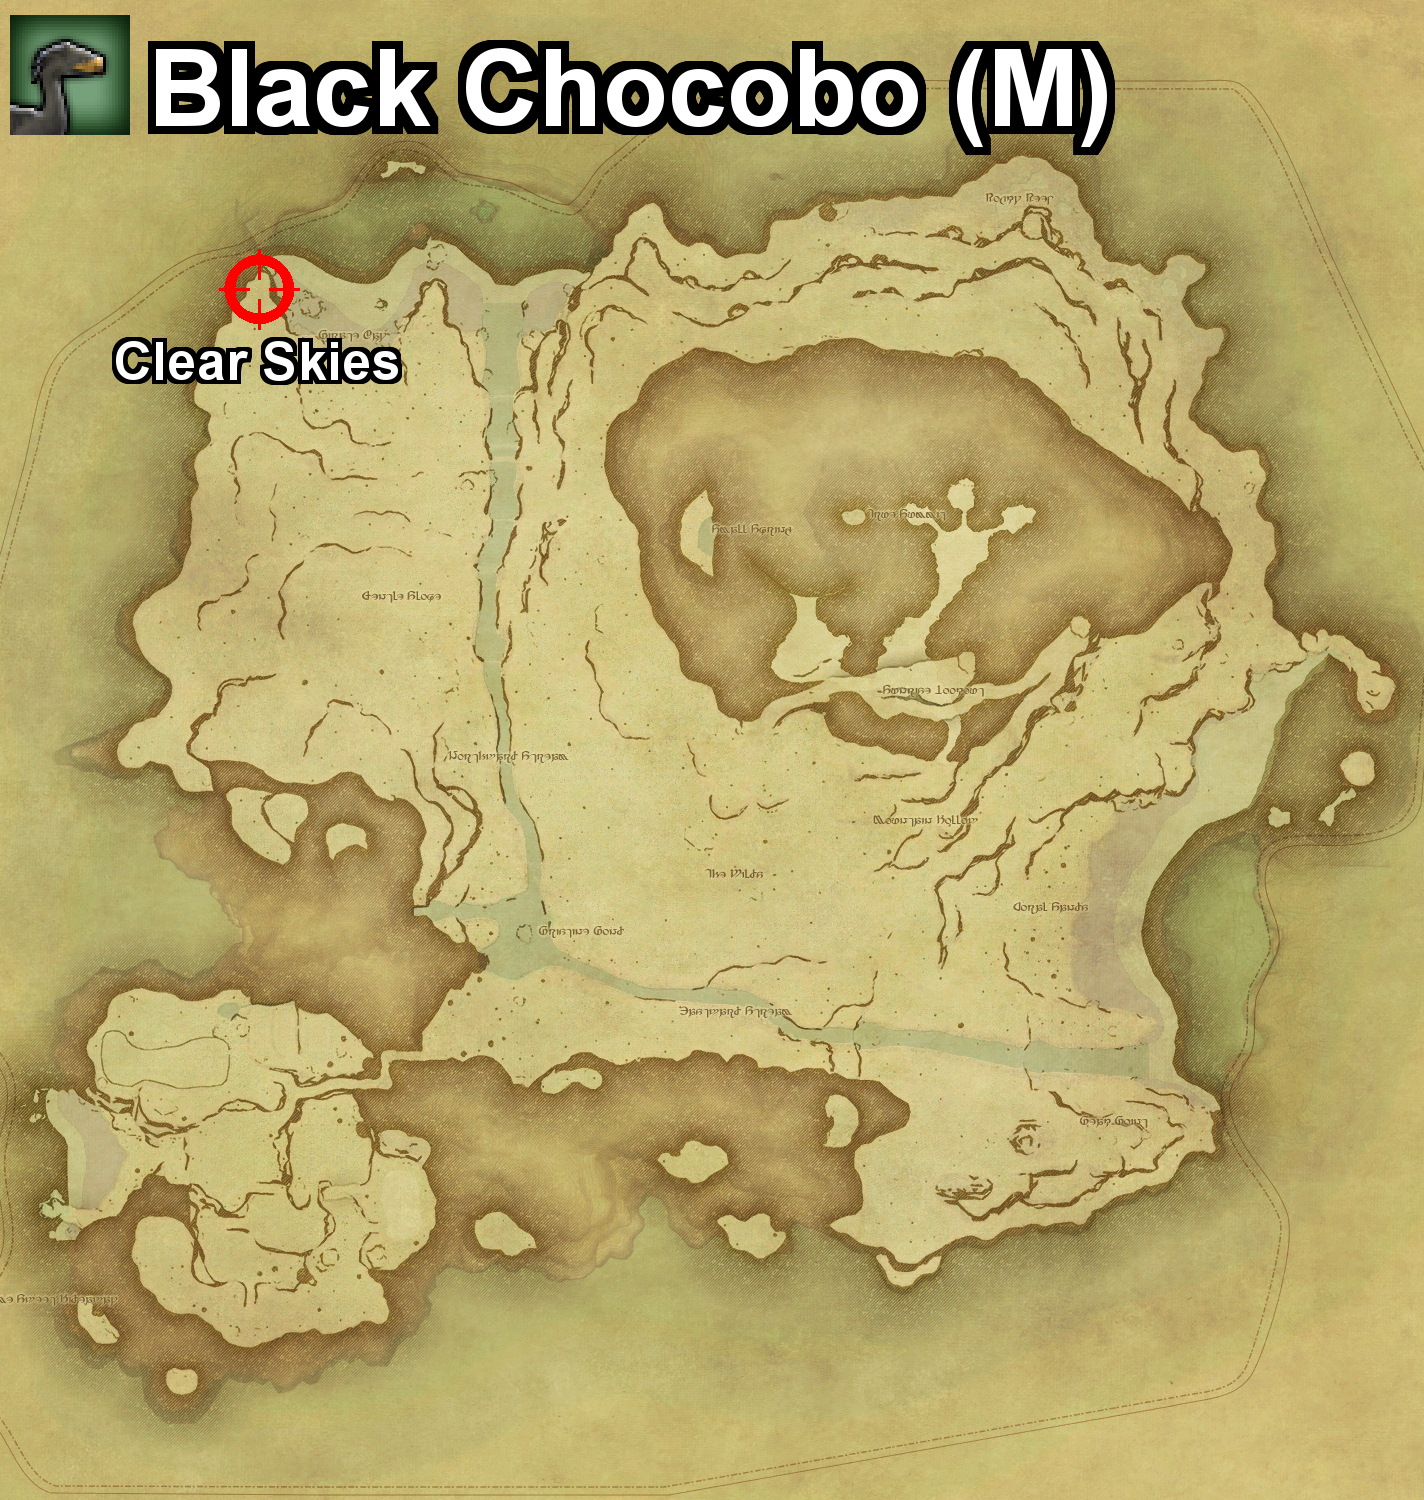 The location where the Black Chocobo can be found, and the required conditions, on Island Sanctuary in Final Fantasy XIV.